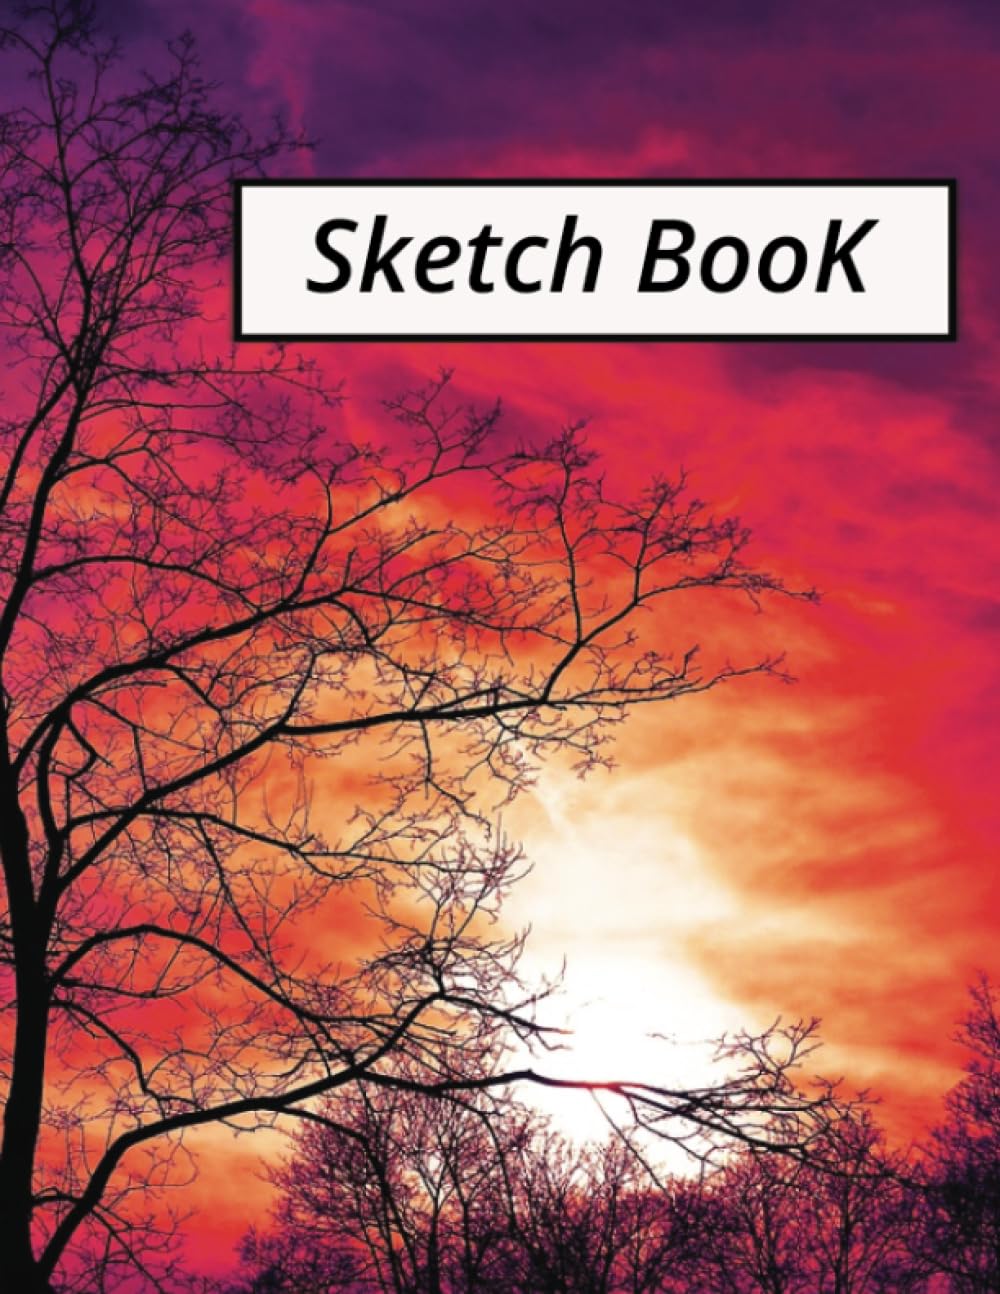 Cuaderno: Sketch Book: Notebook for Drawing, Writing, Painting, Sketching or Doodling, por Amazon